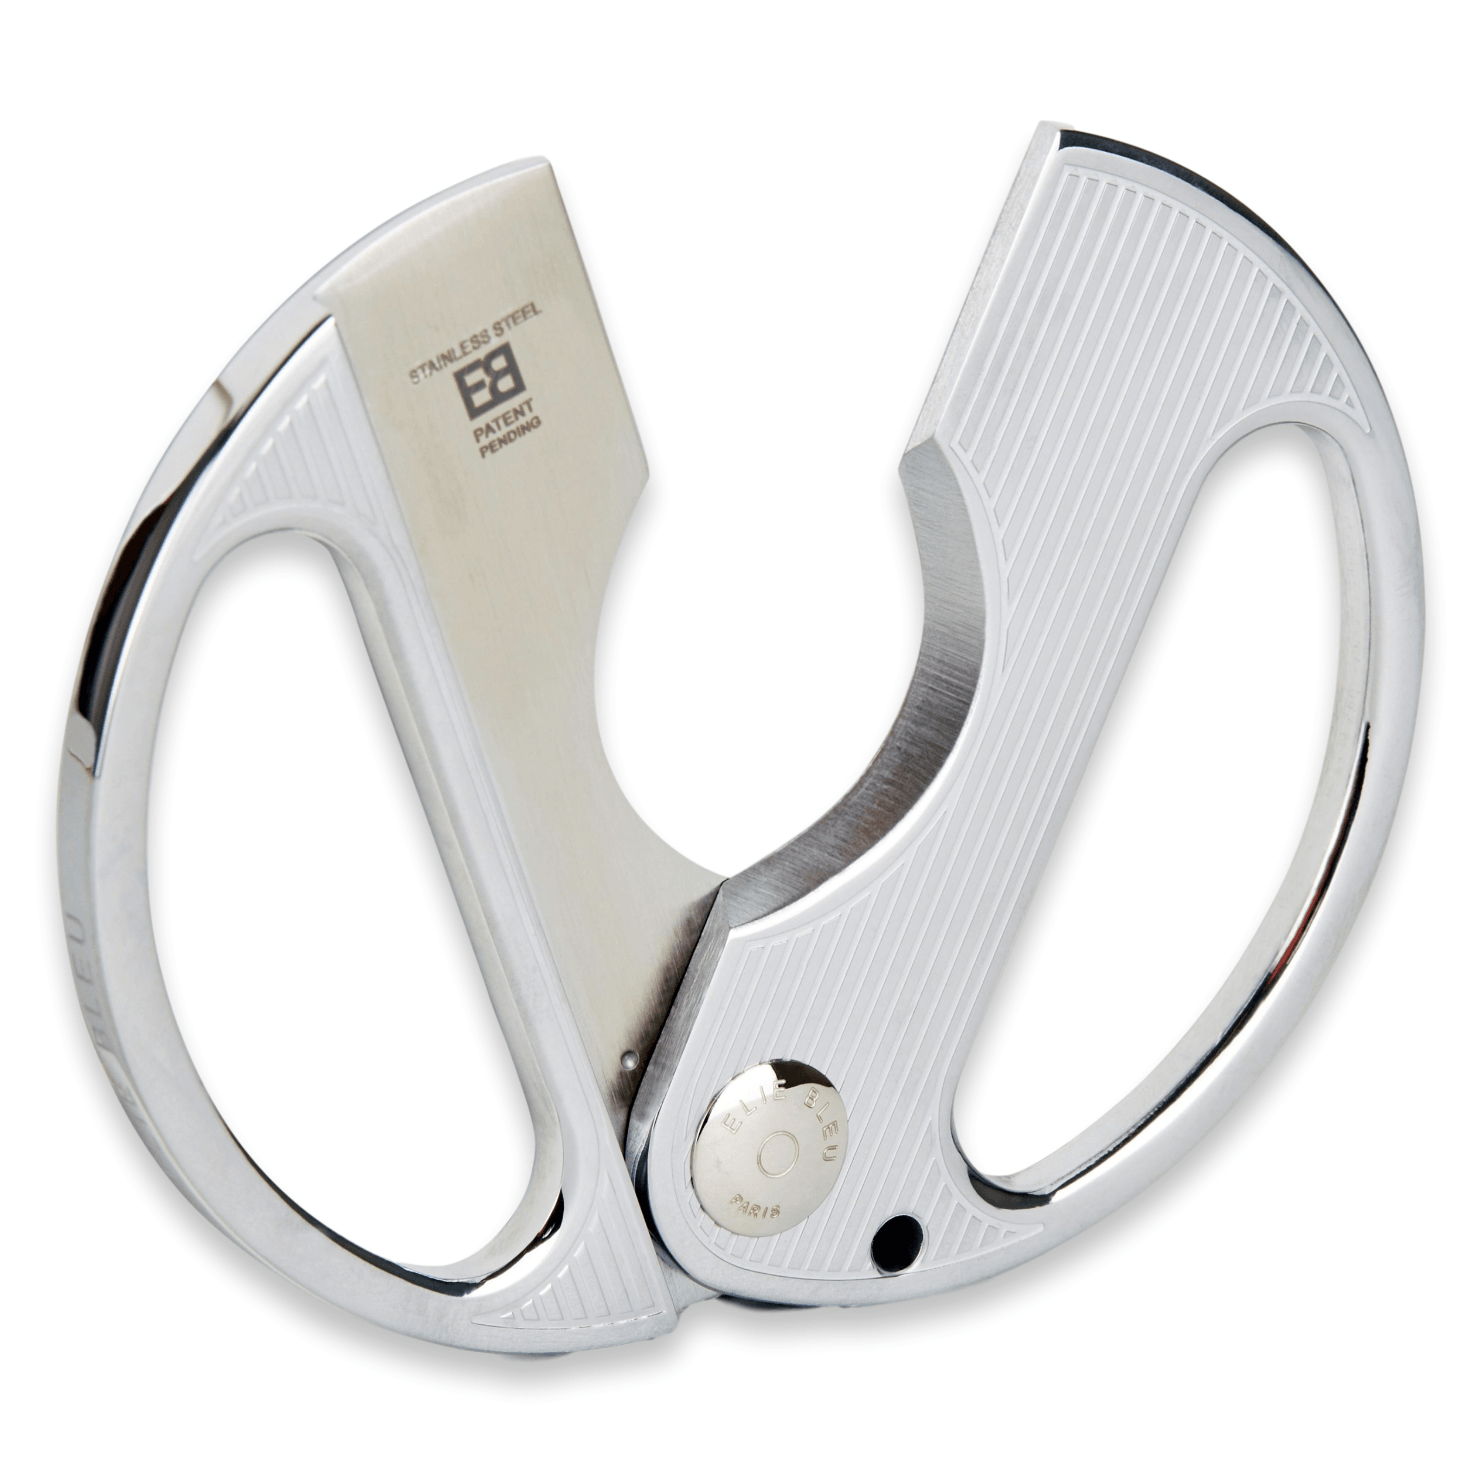 ELIE BLEU Cigar Cutter Stainless EBC-2 Stainless Steel with pinstripe - hk.cohcigars